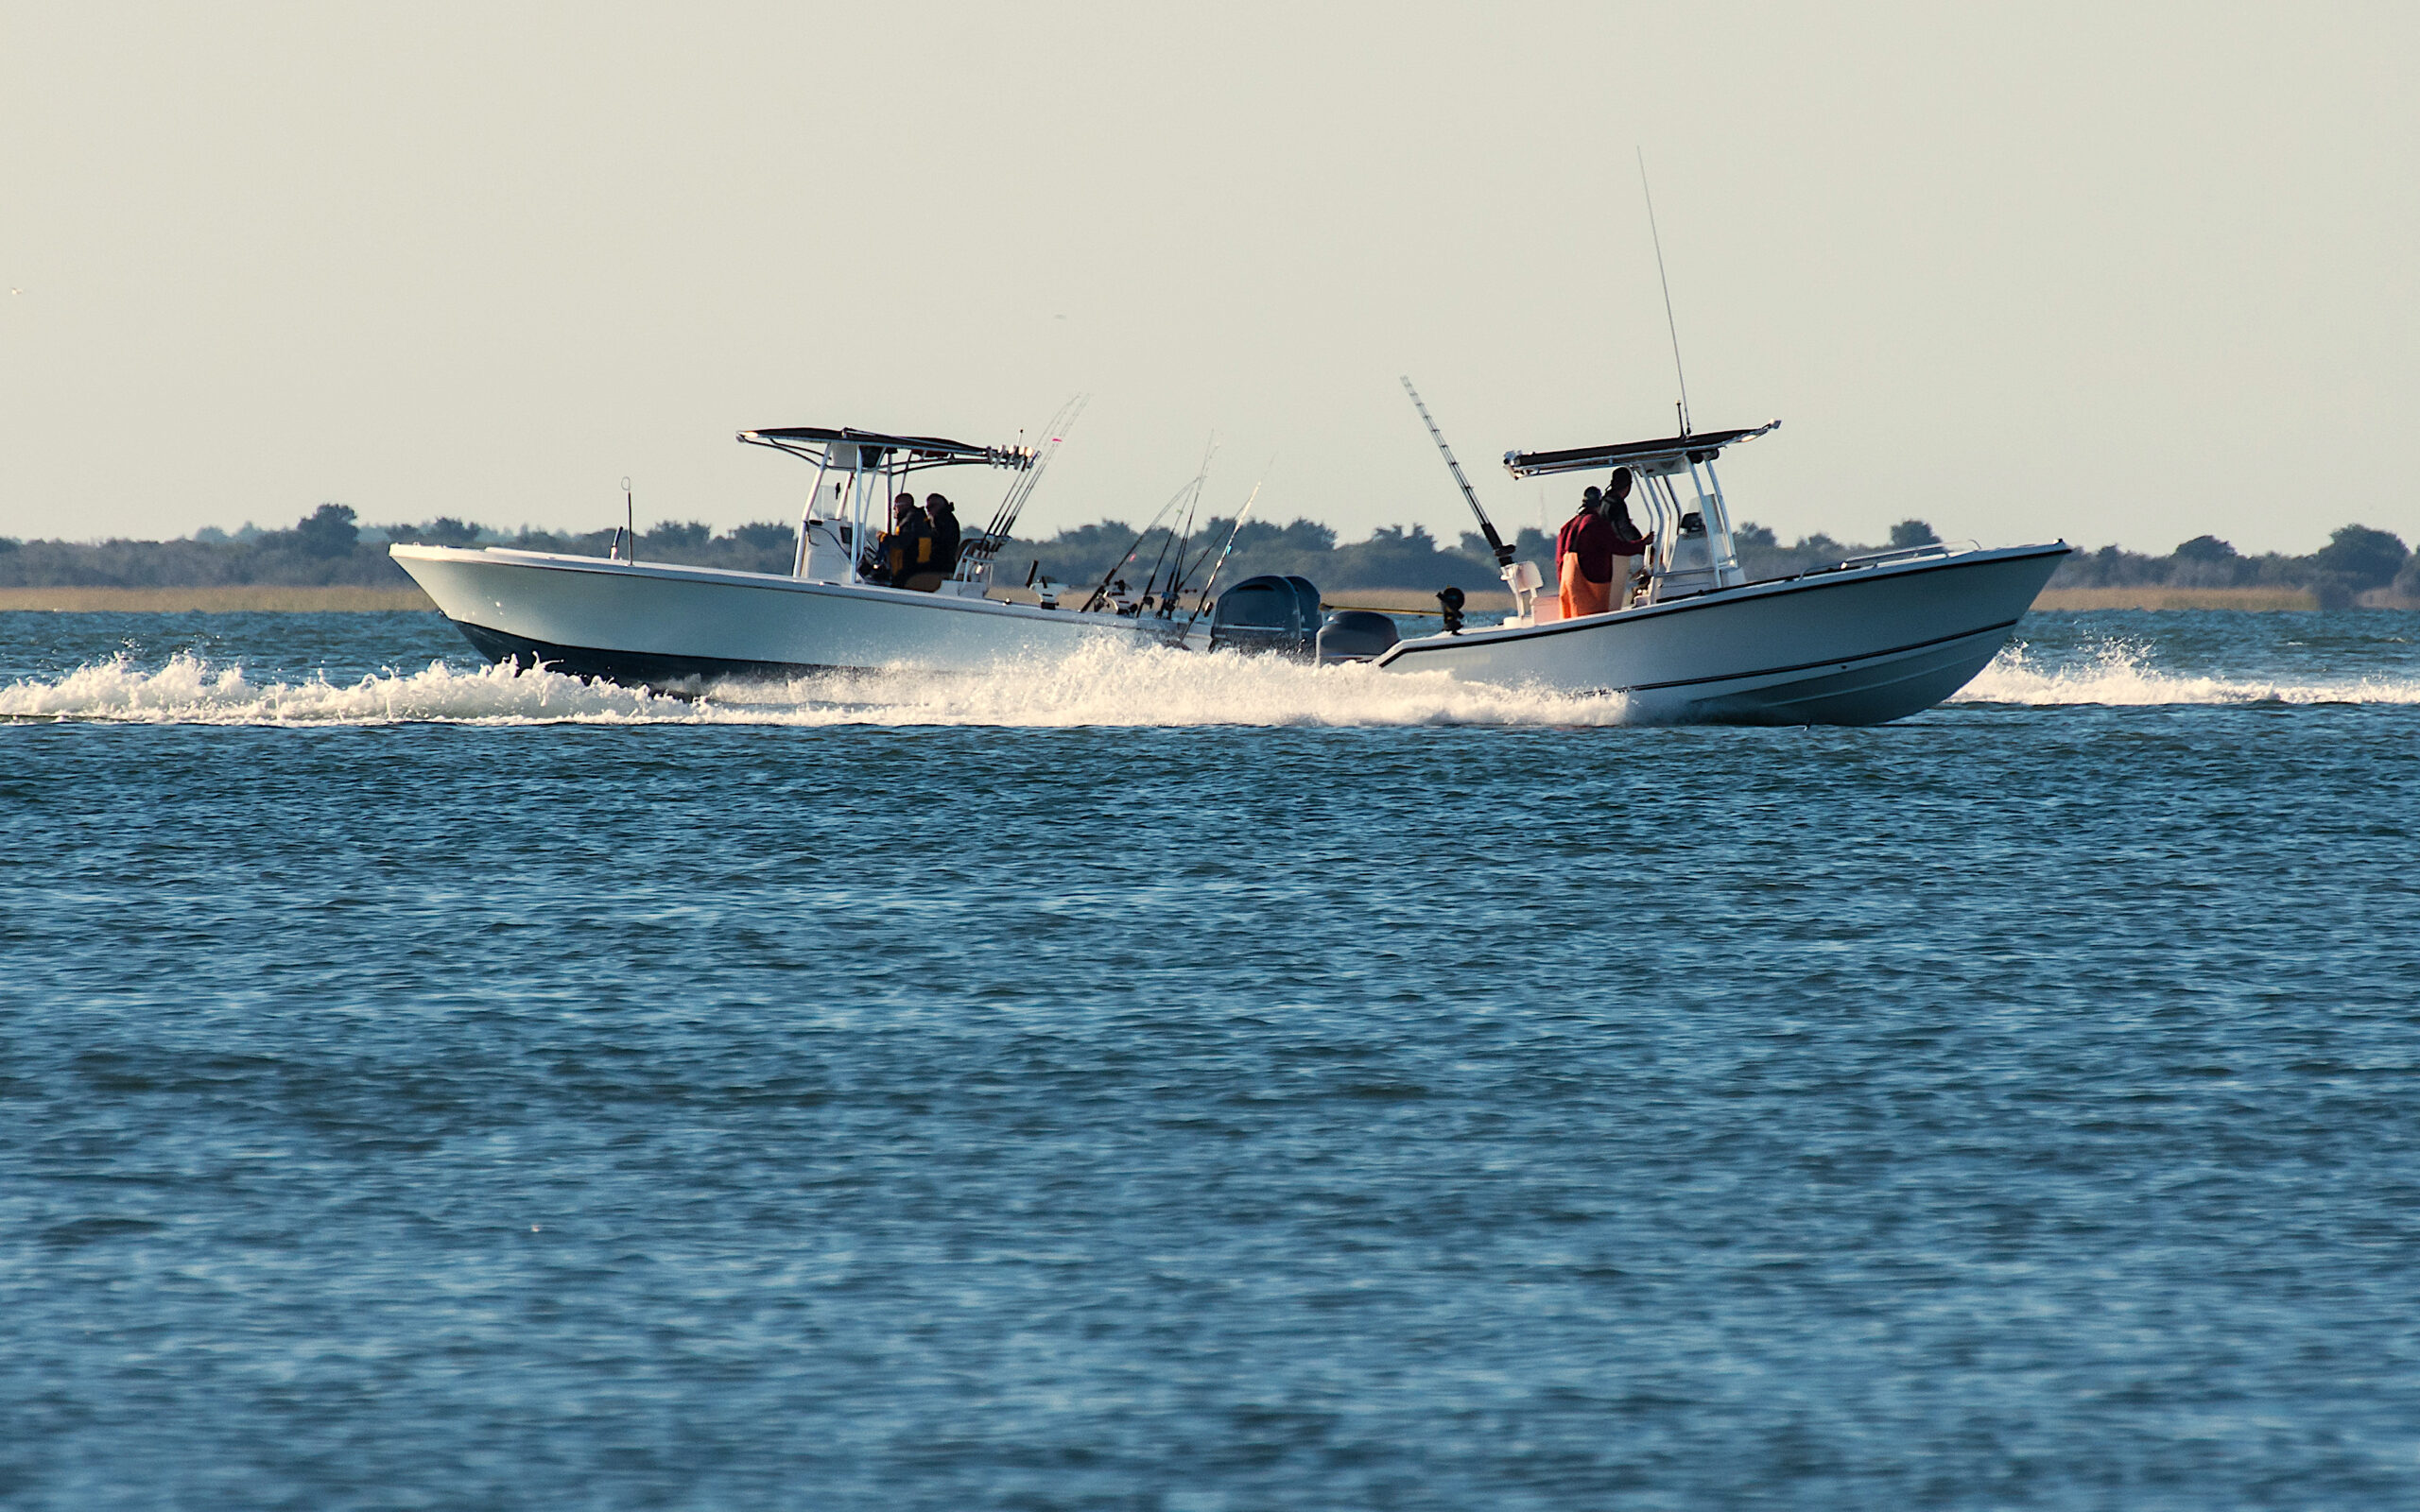 image: two boats full of fishers on NC waters.